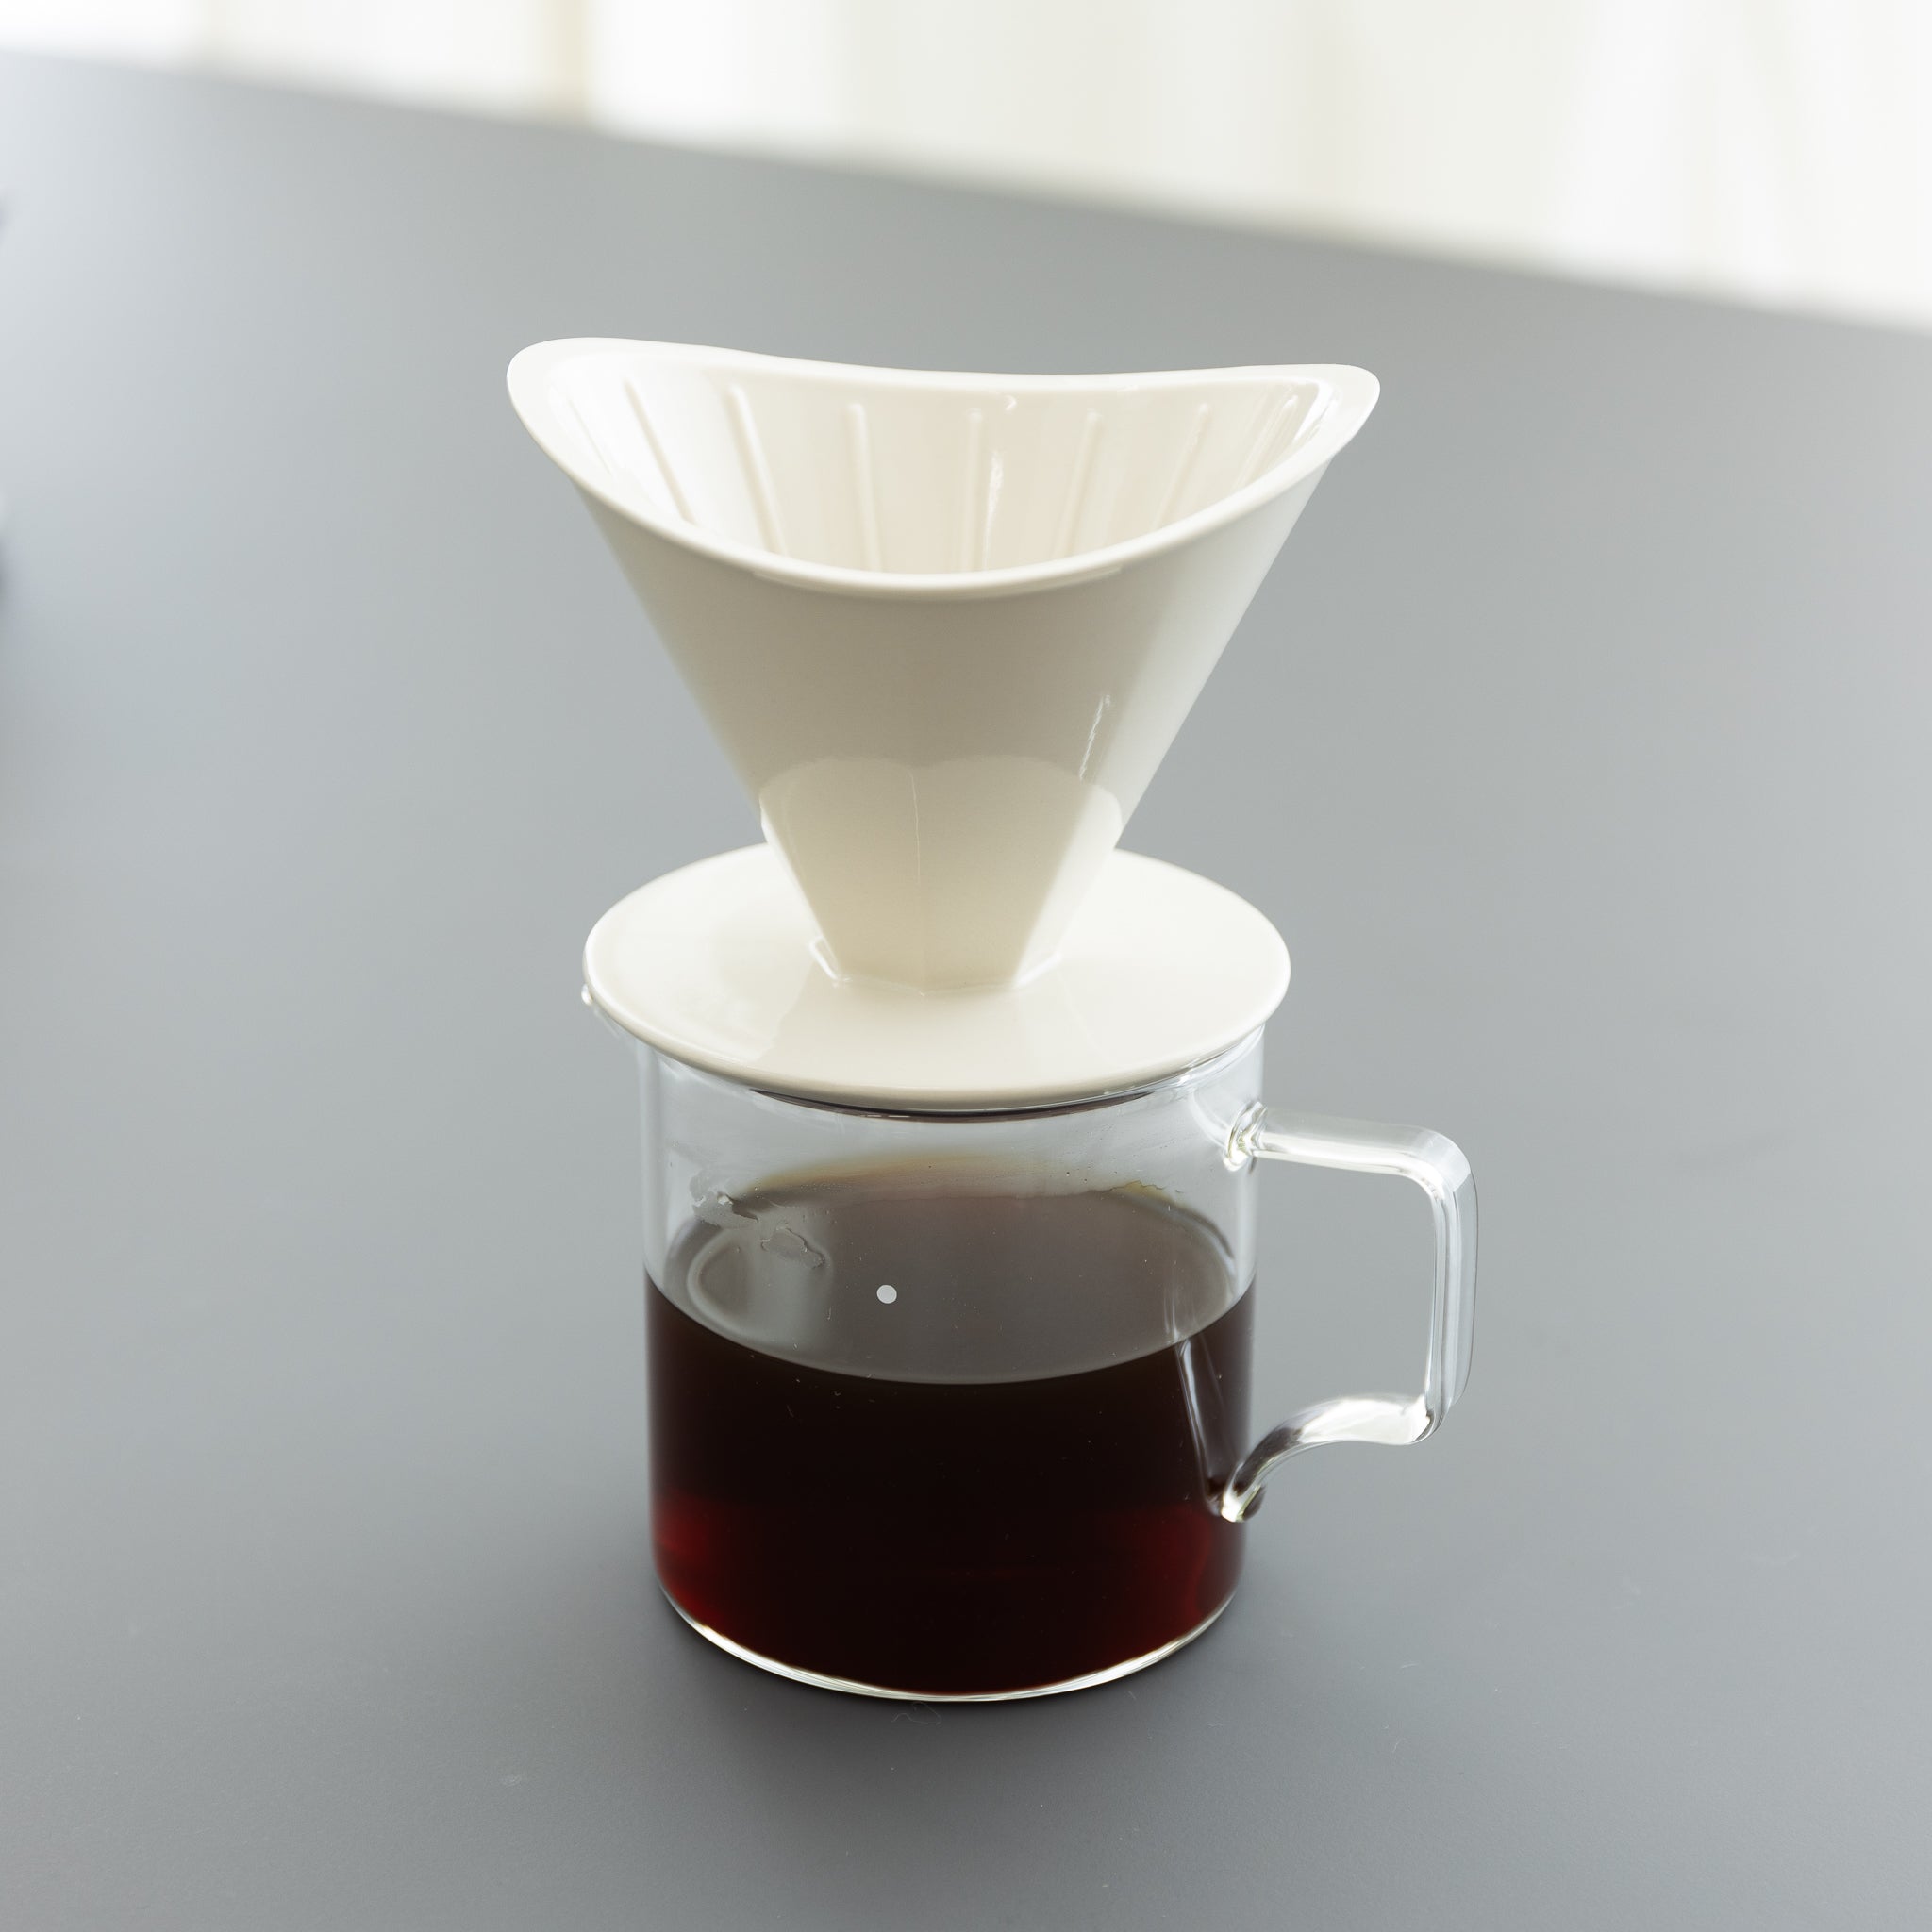 KINTO OCT Coffee Jug - 2 Cups | Tortoise General Store